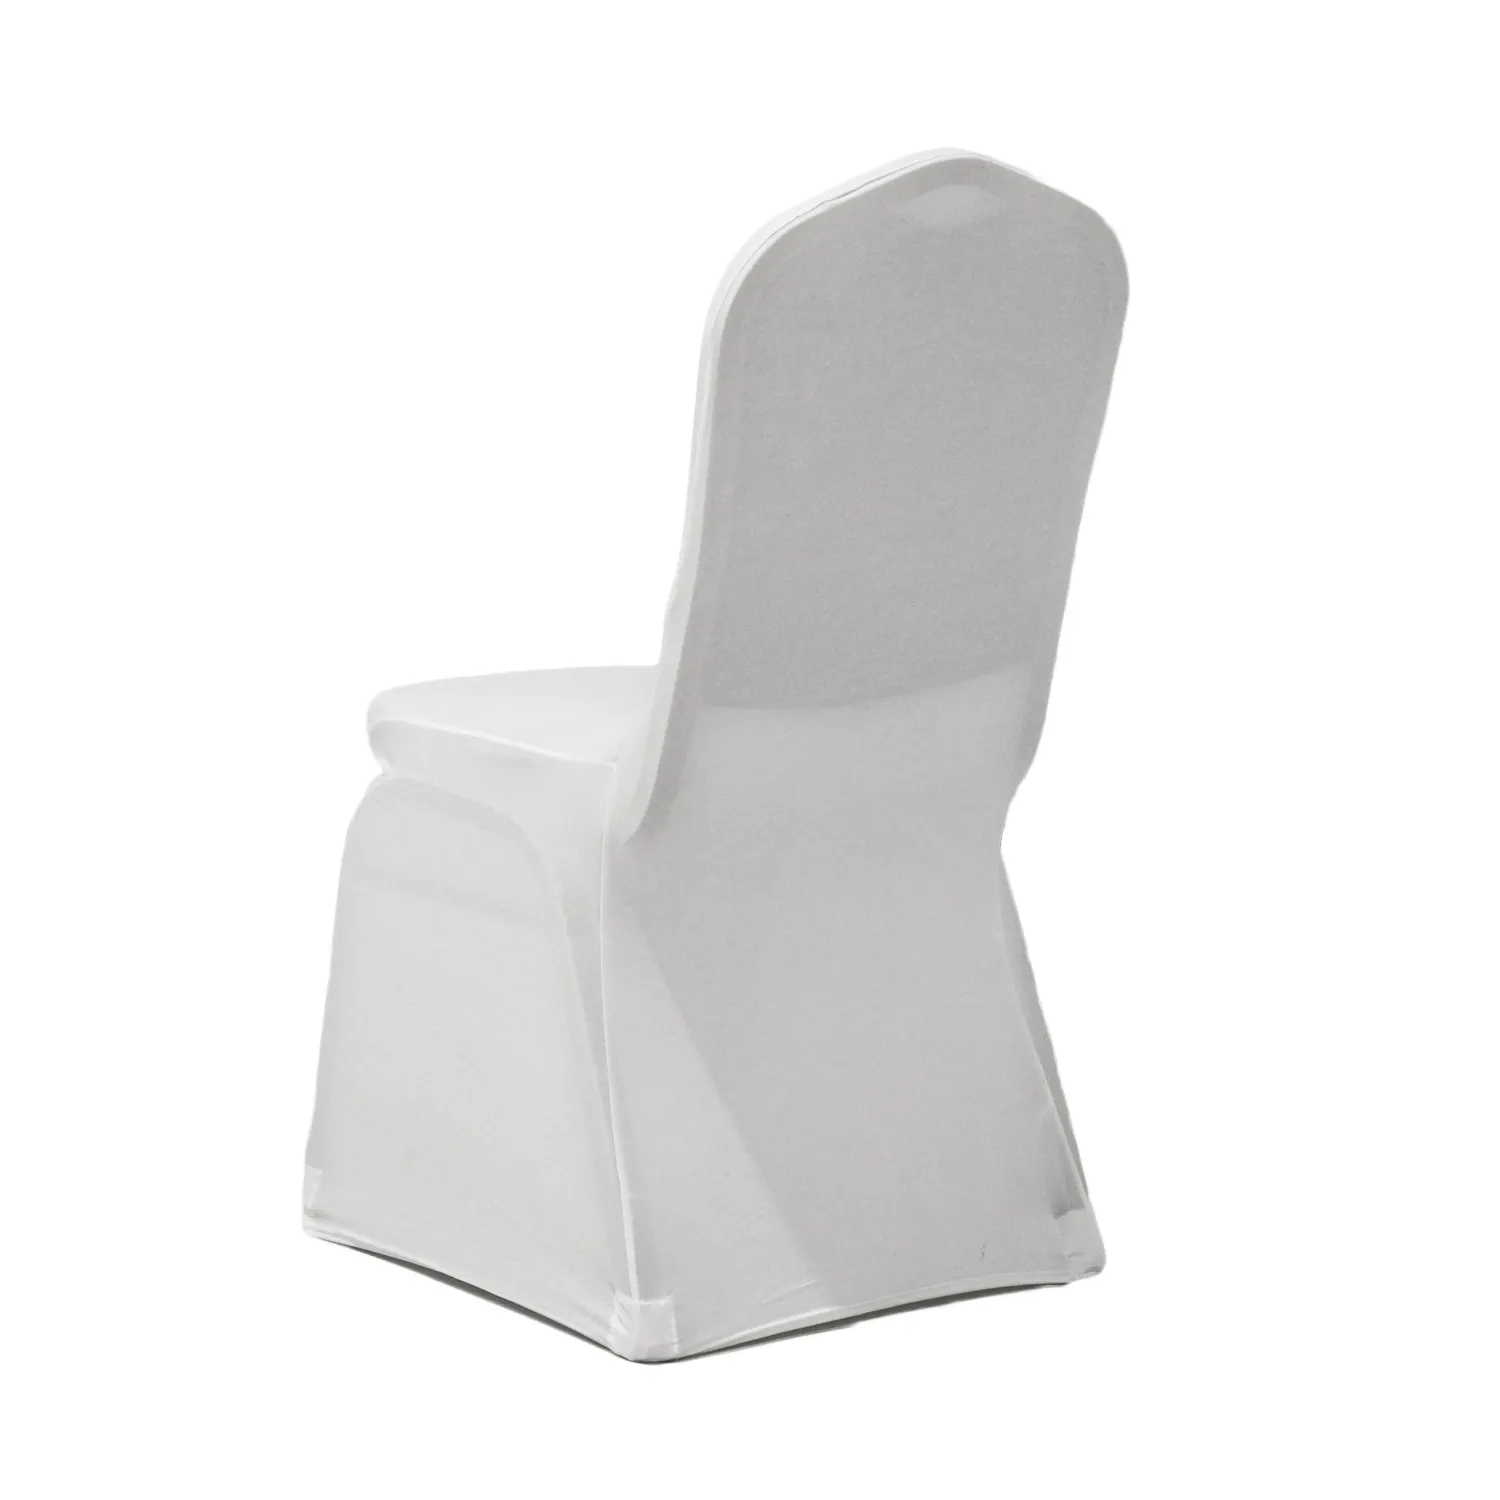 Hot sale Factory Price Solid Color Spandex Wedding Chair Cover for Banquet Party Dinner Hotel Wedding Decorations